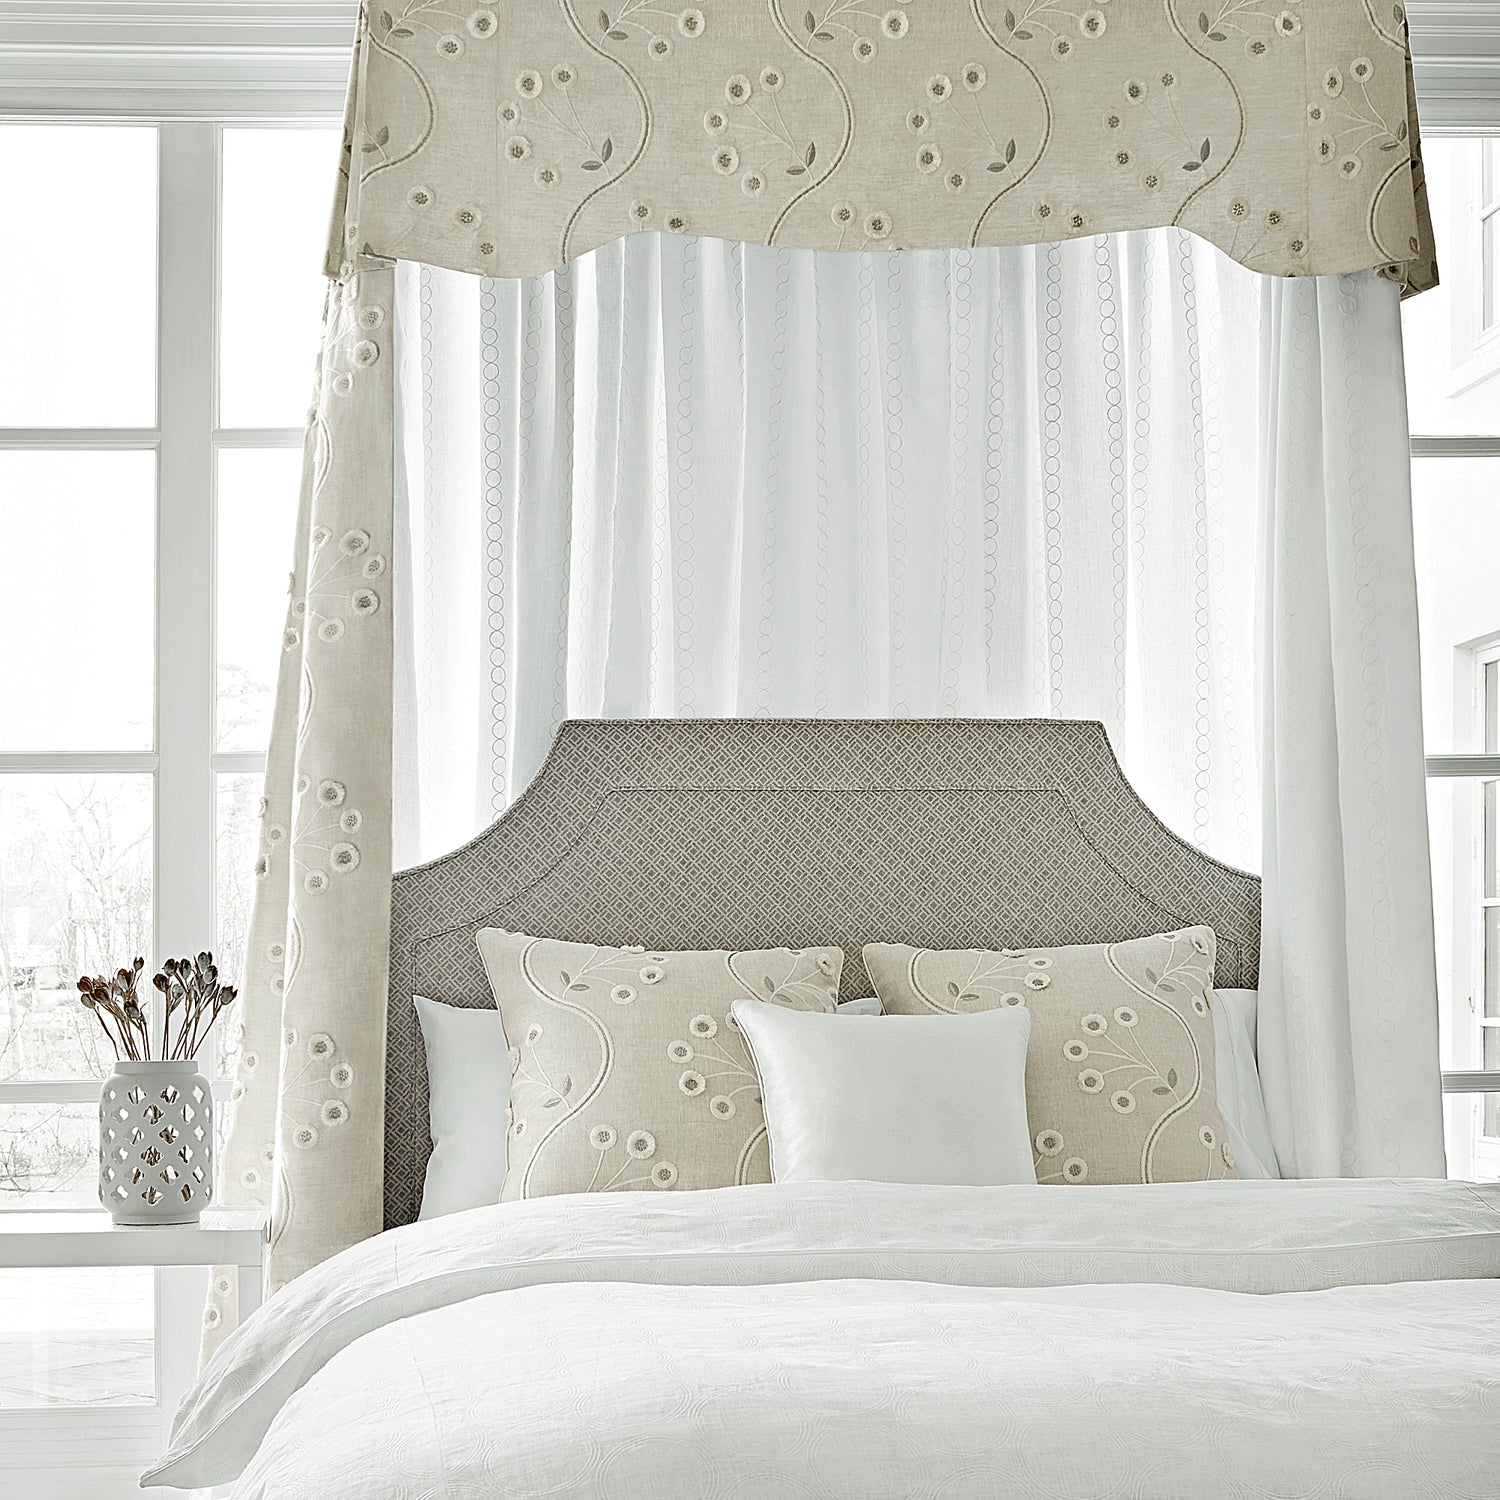 Room with Draperies and pillow made from Olympus Embroidery fabric in natural color - pattern number AW9100 - by Anna French